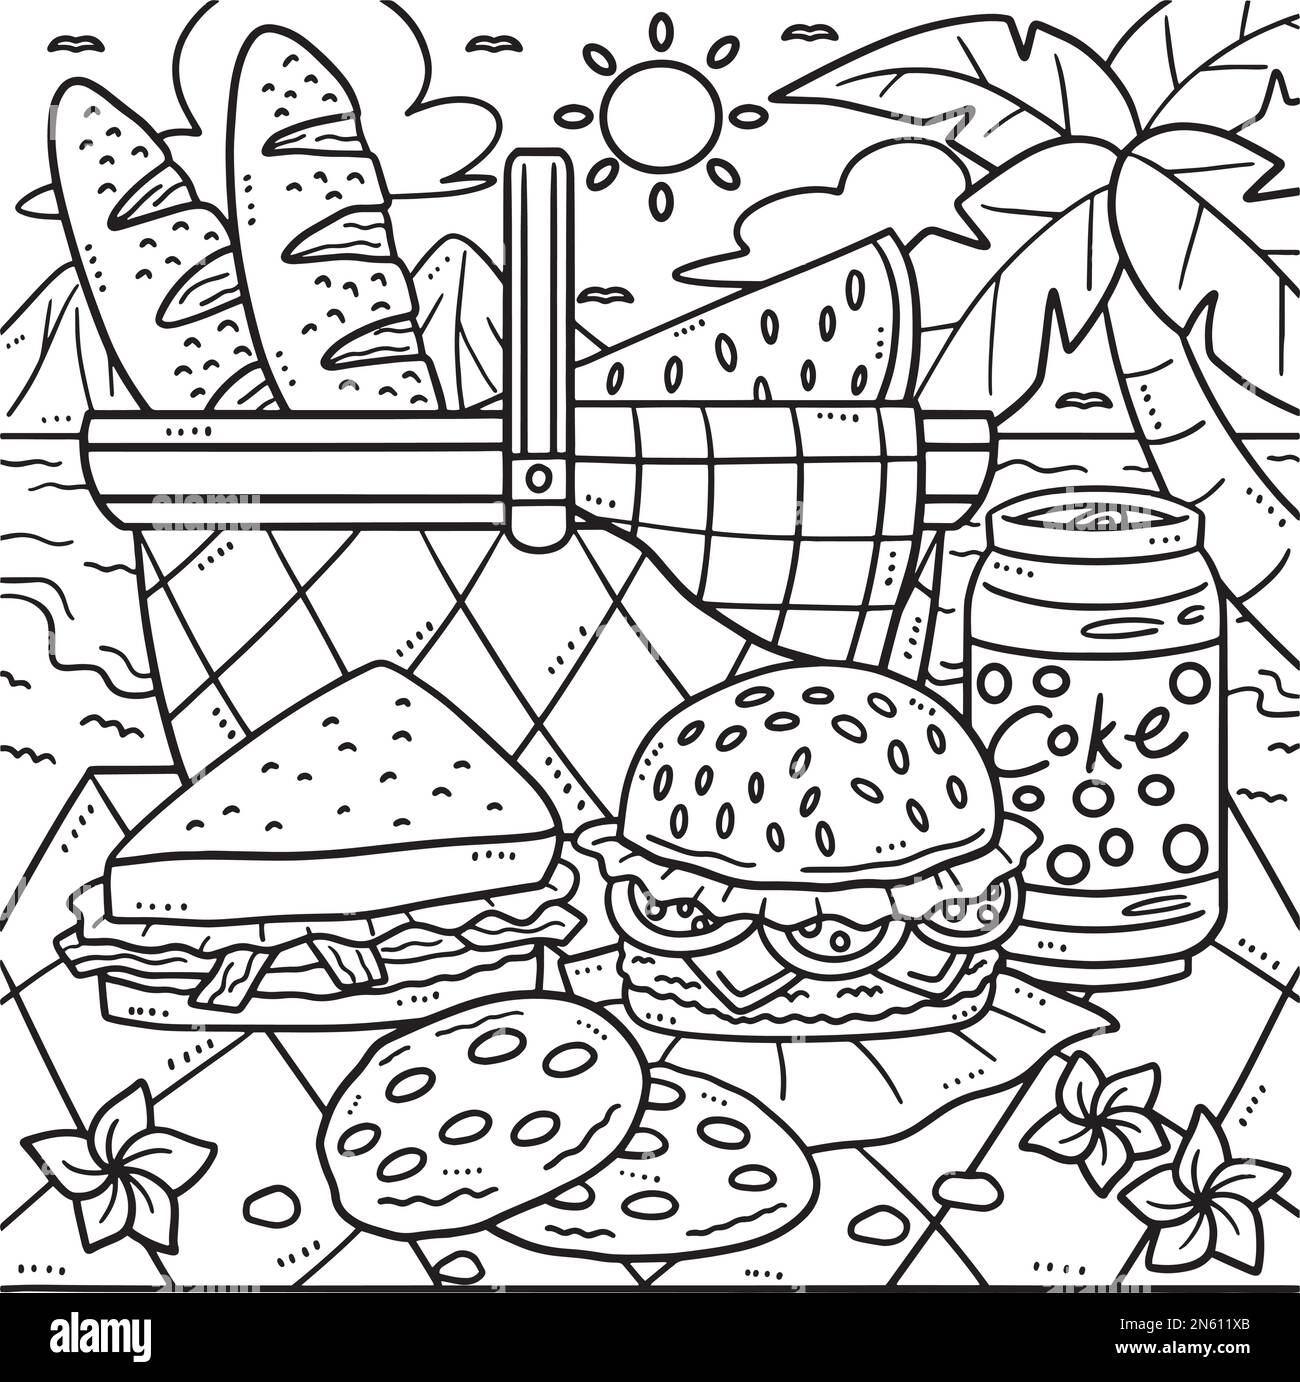 Summer picnic food by the shore coloring page stock vector image art